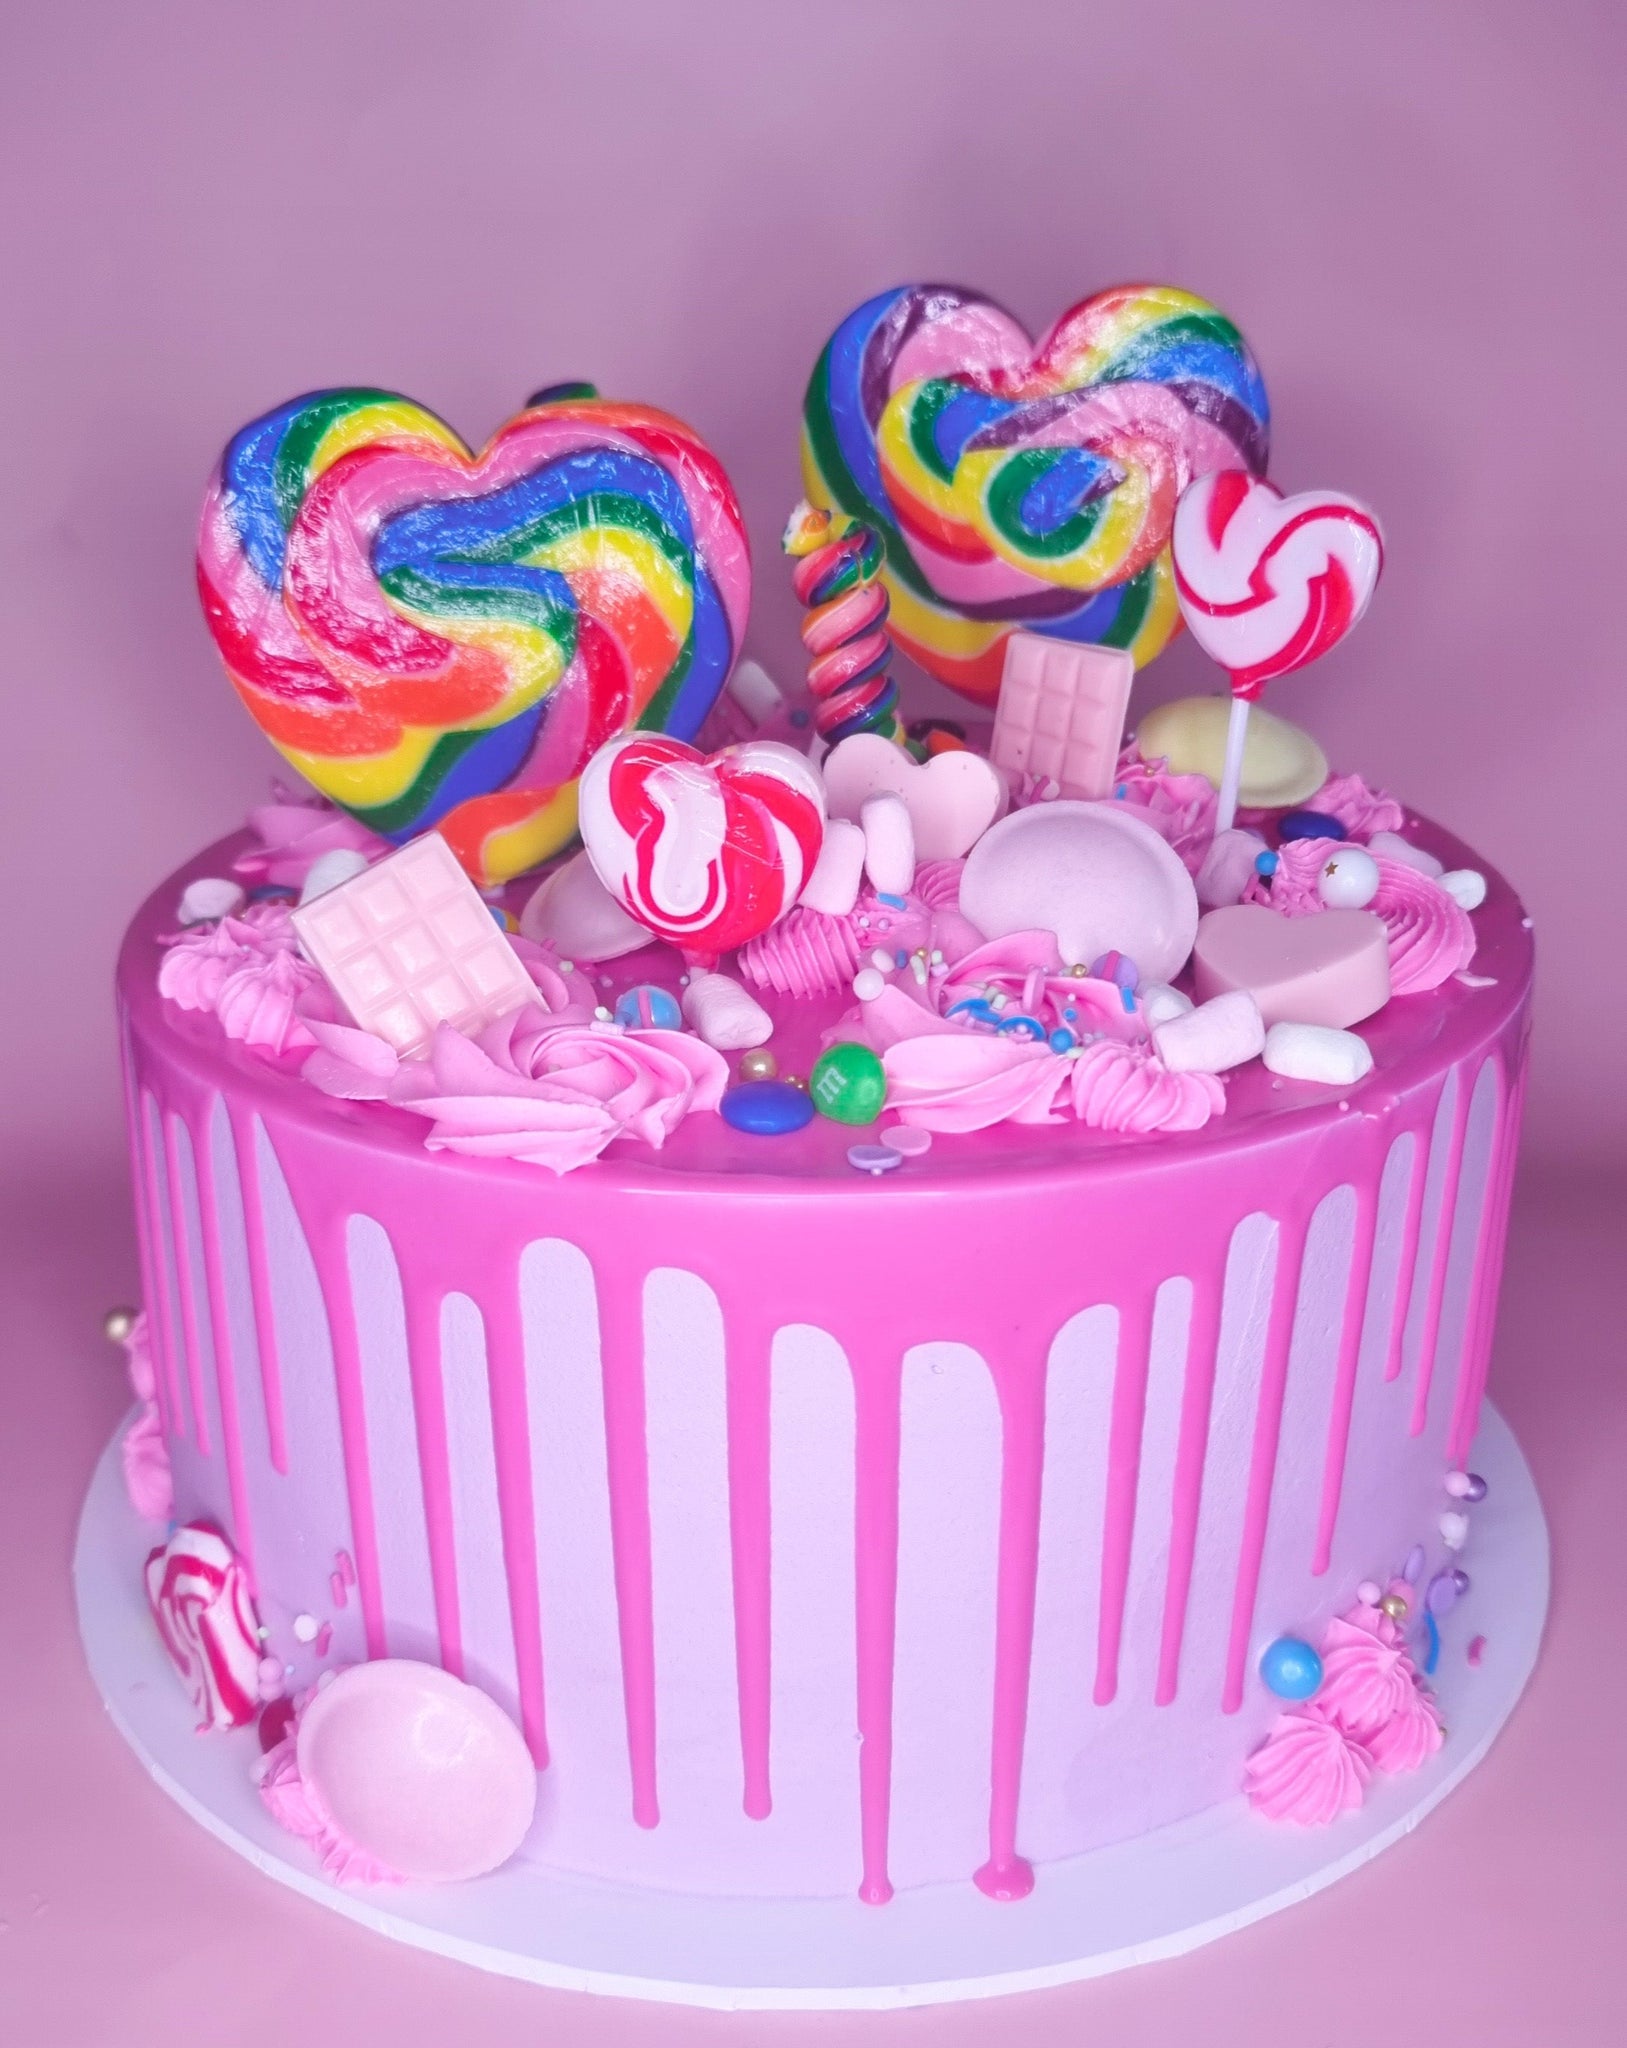 Superb Candy Land Cake - Between The Pages Blog